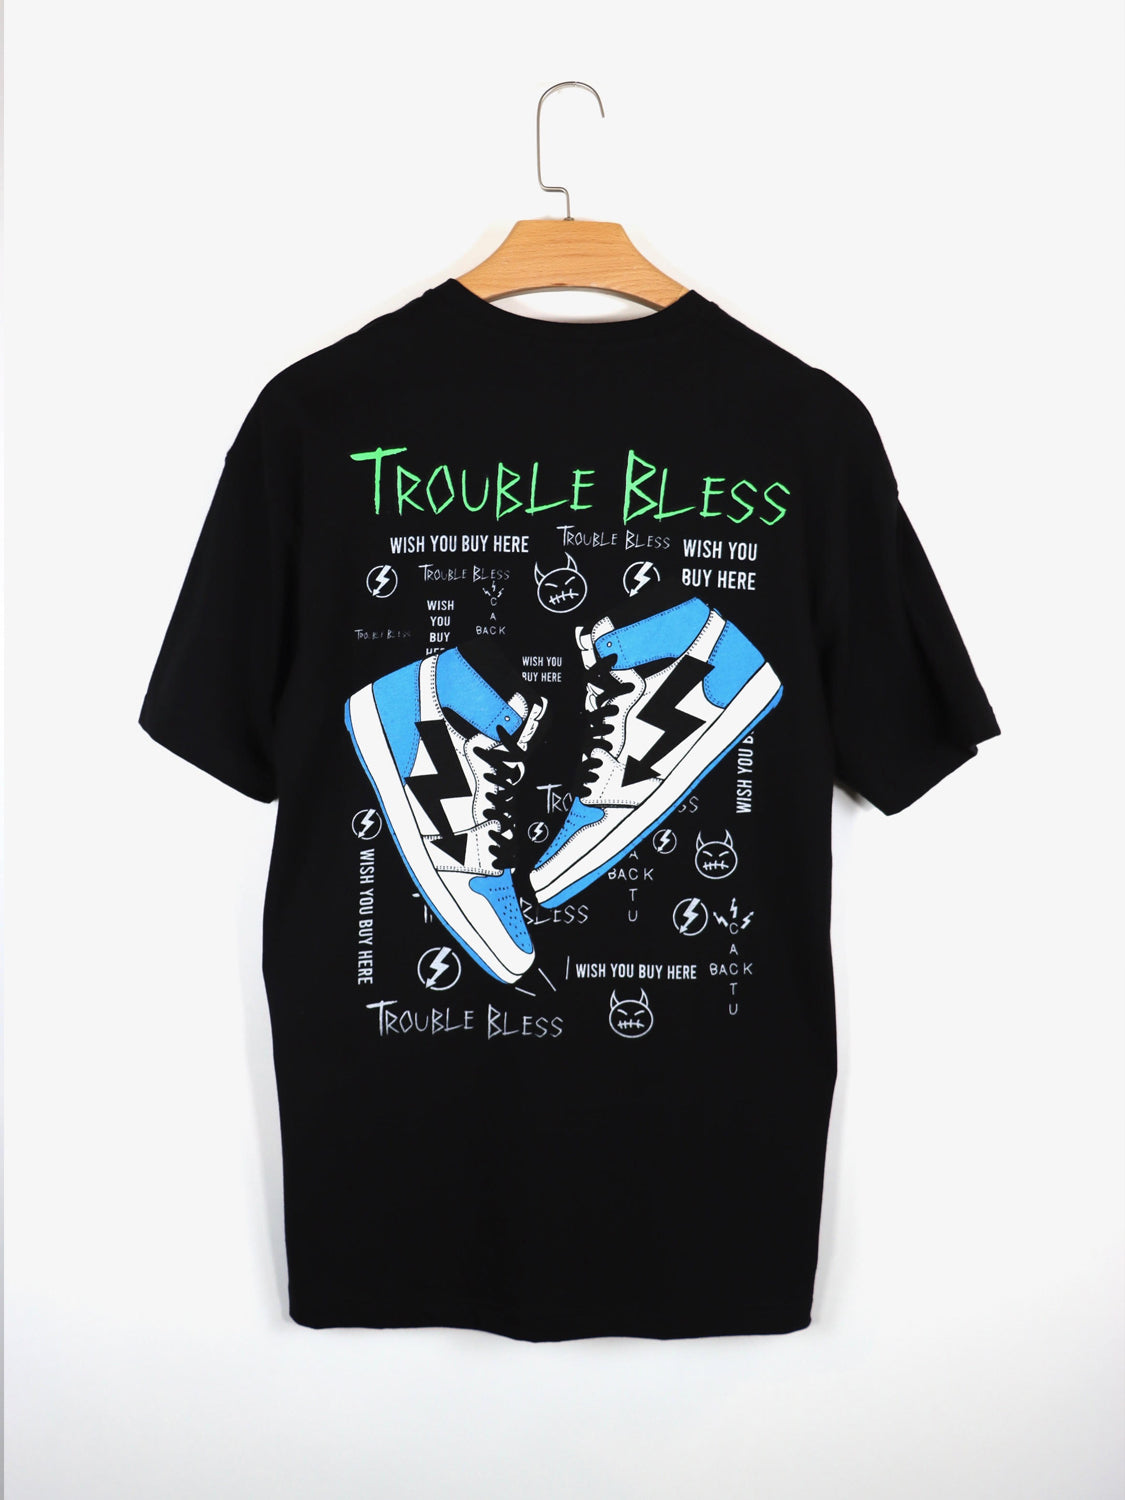 T-SHIRT "TROUBLE BLESS" - Col. Nero